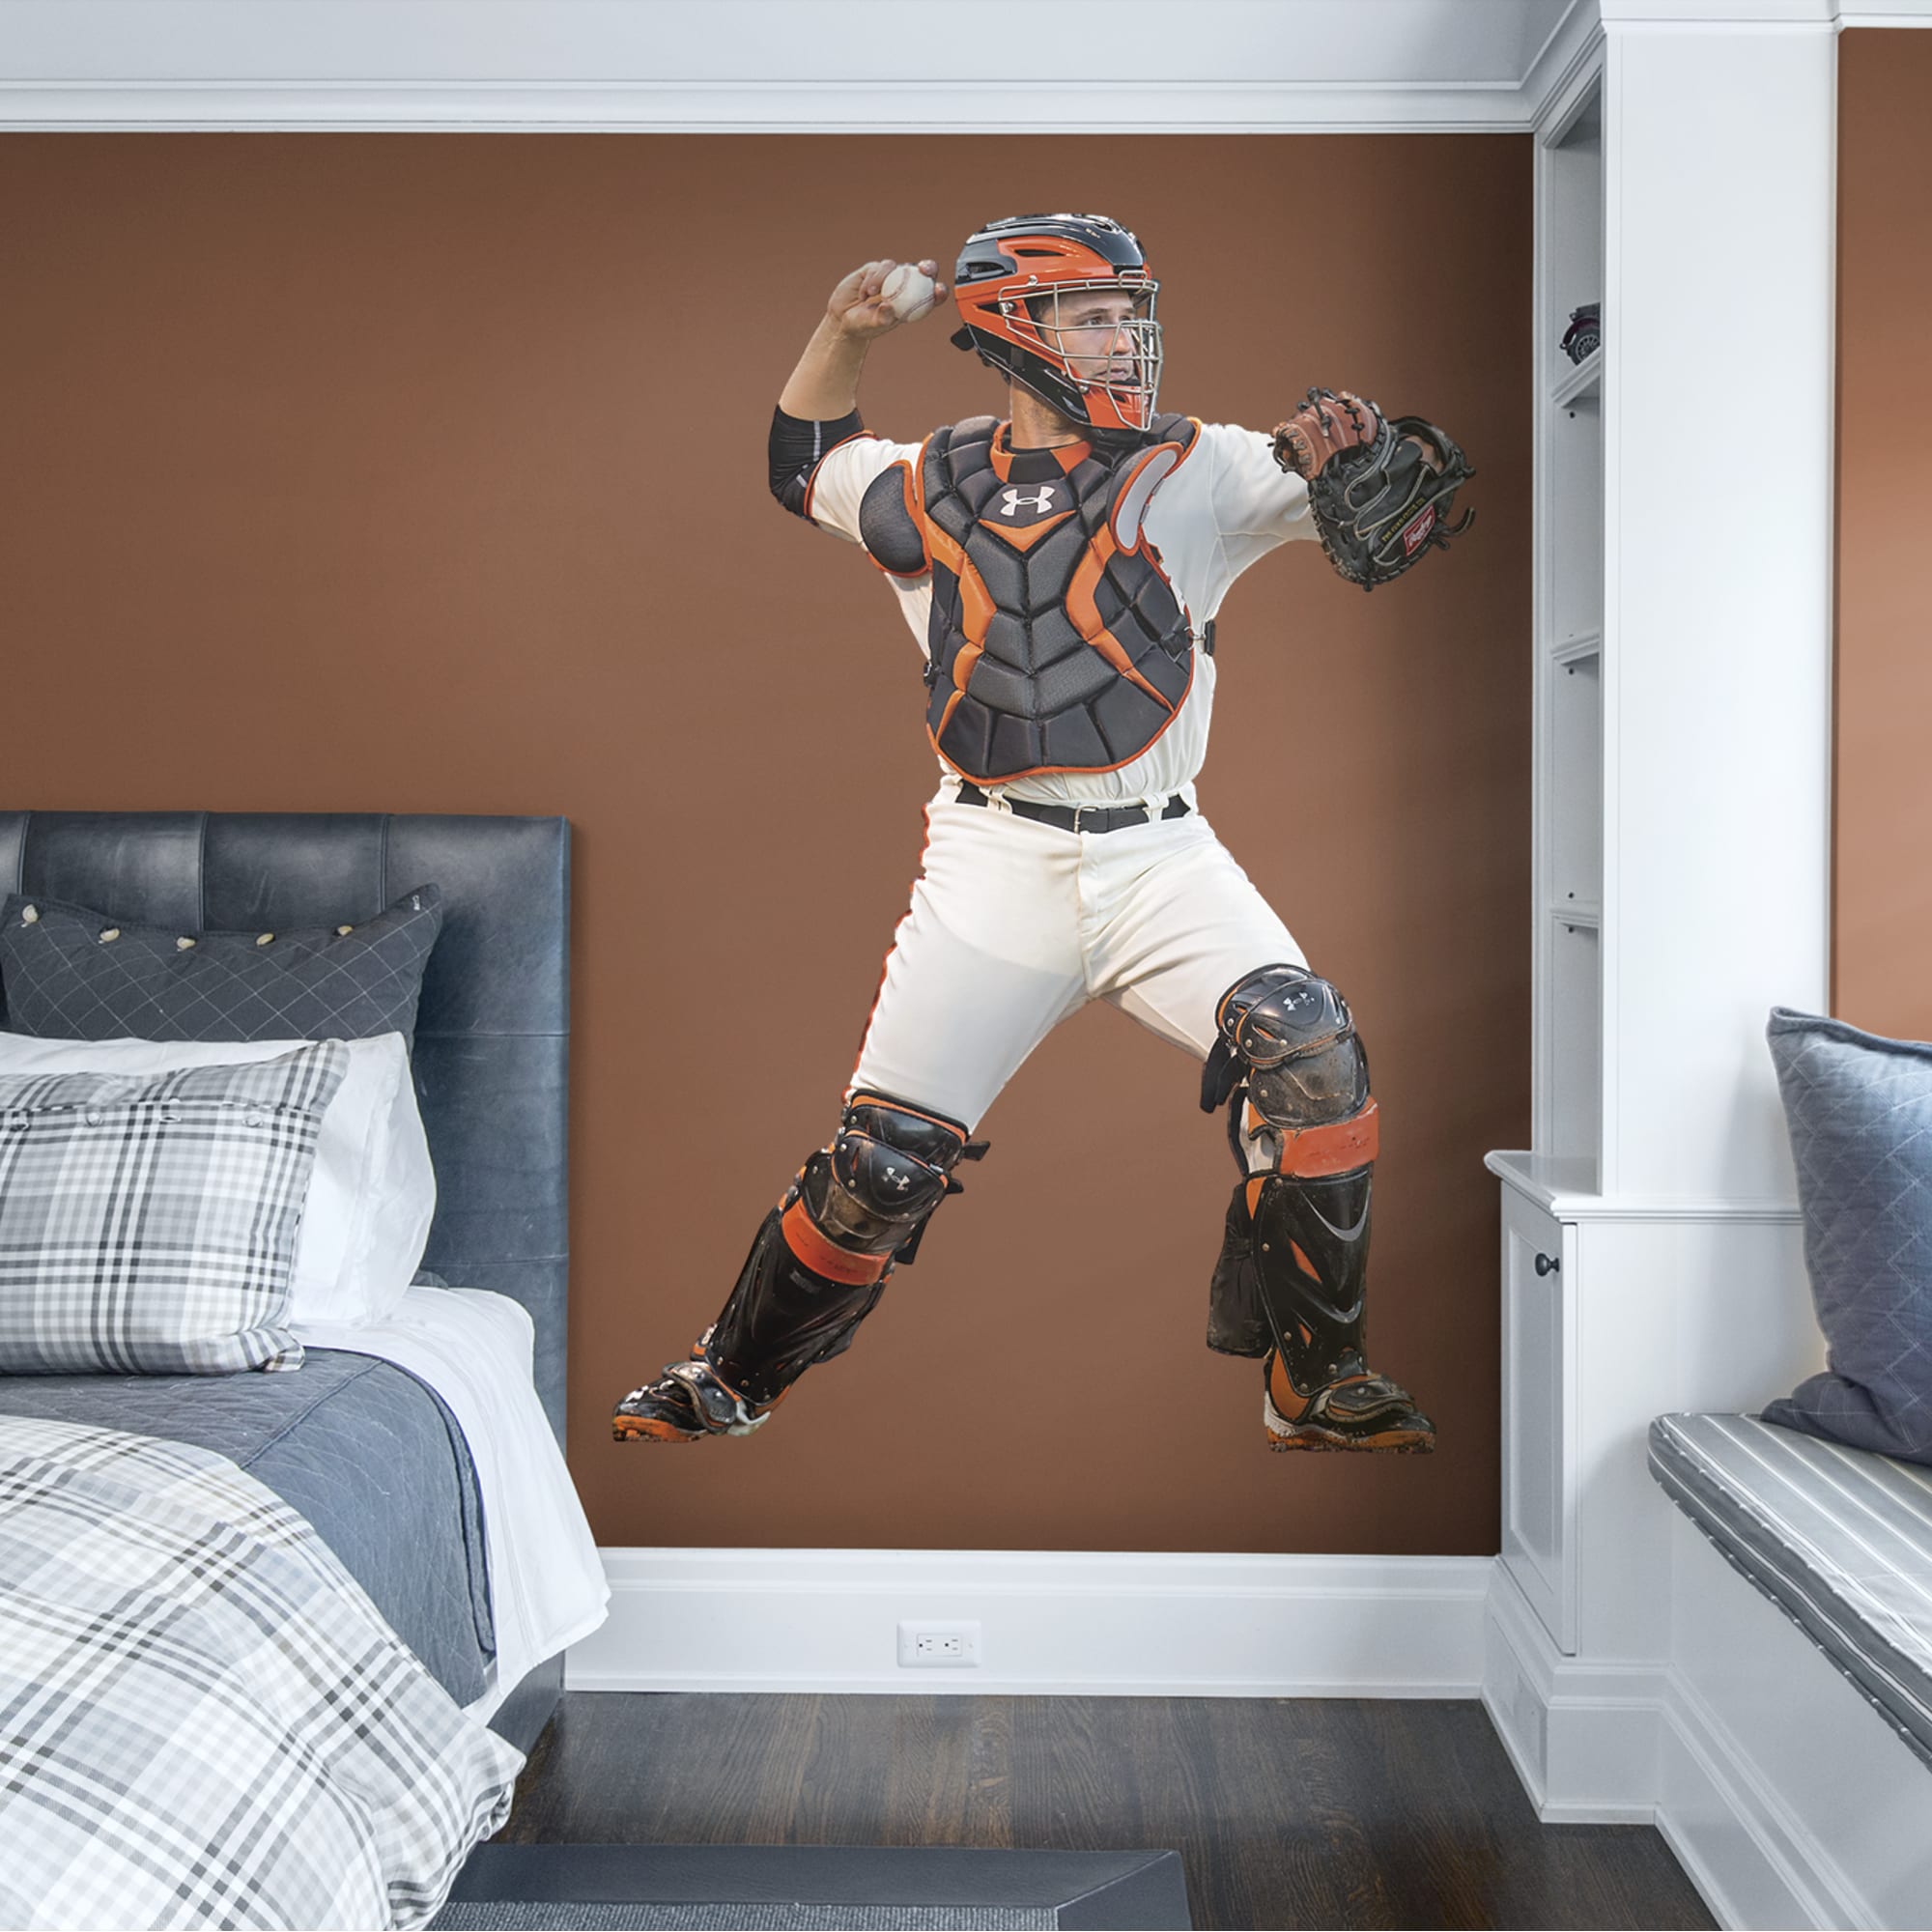 Buster Posey for San Francisco Giants: Catcher - Officially Licensed MLB Removable Wall Decal XL by Fathead | Vinyl